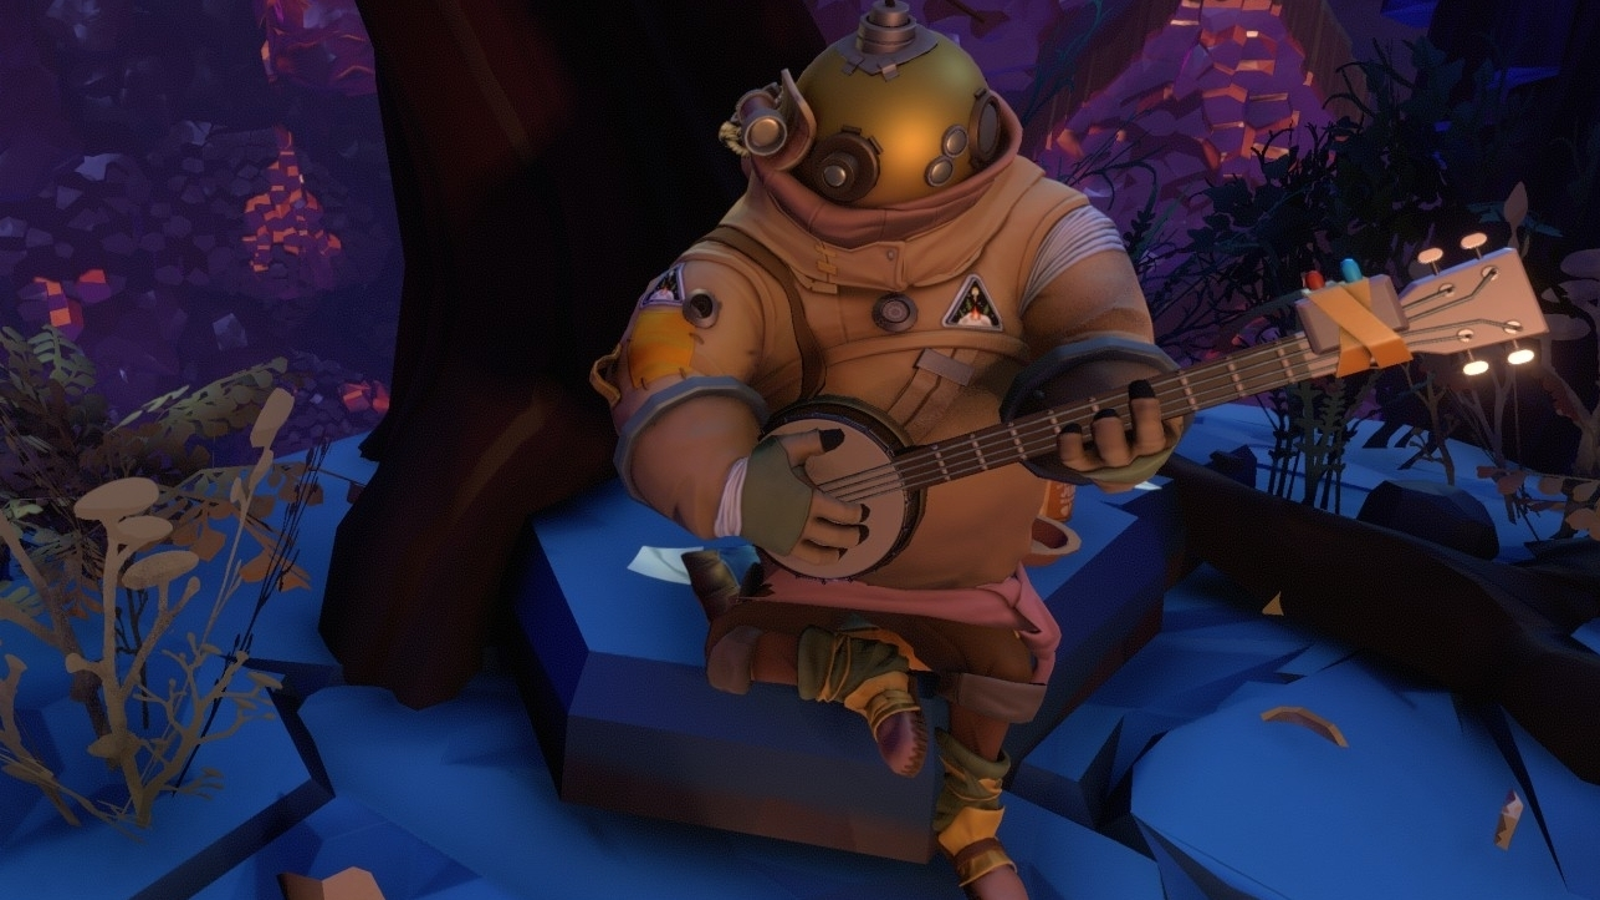 Outer Wilds: The Kotaku Review